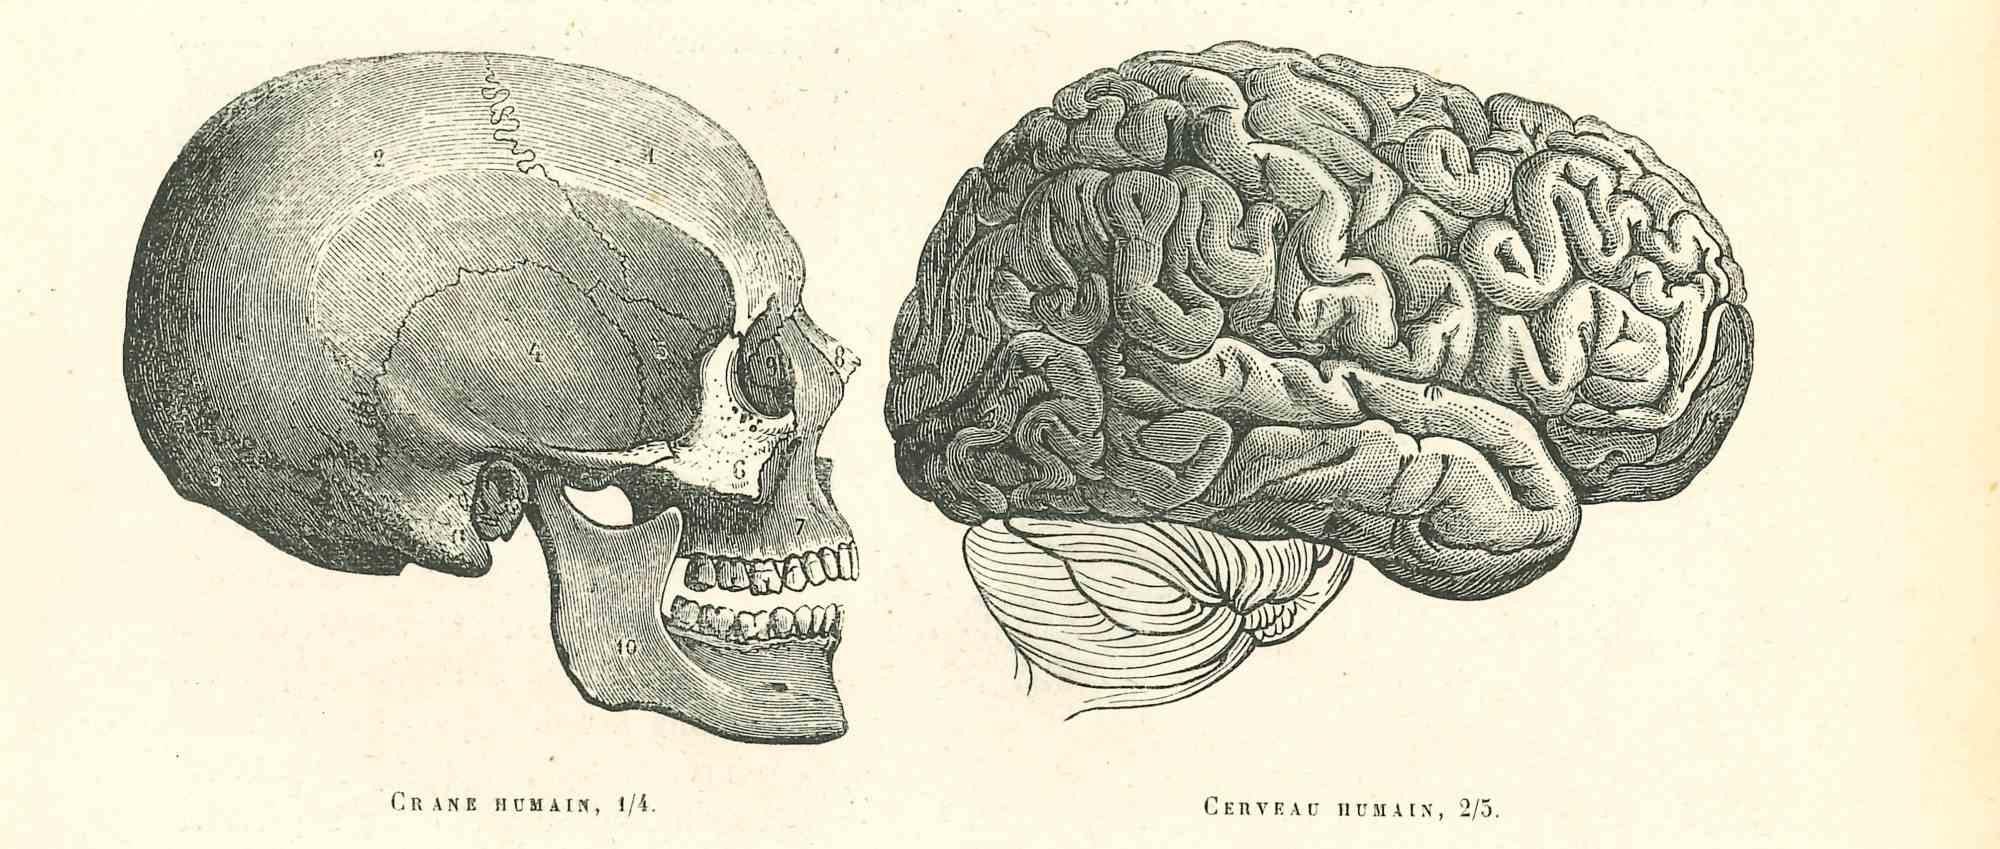 The Skull is an original lithograph on ivory-colored paper, realized by Paul Gervais (1816-1879). The artwork is from The Series of "Les Trois Règnes de la Nature", and was published in 1854.

Good conditions.

Titled on the lower. With the notes on